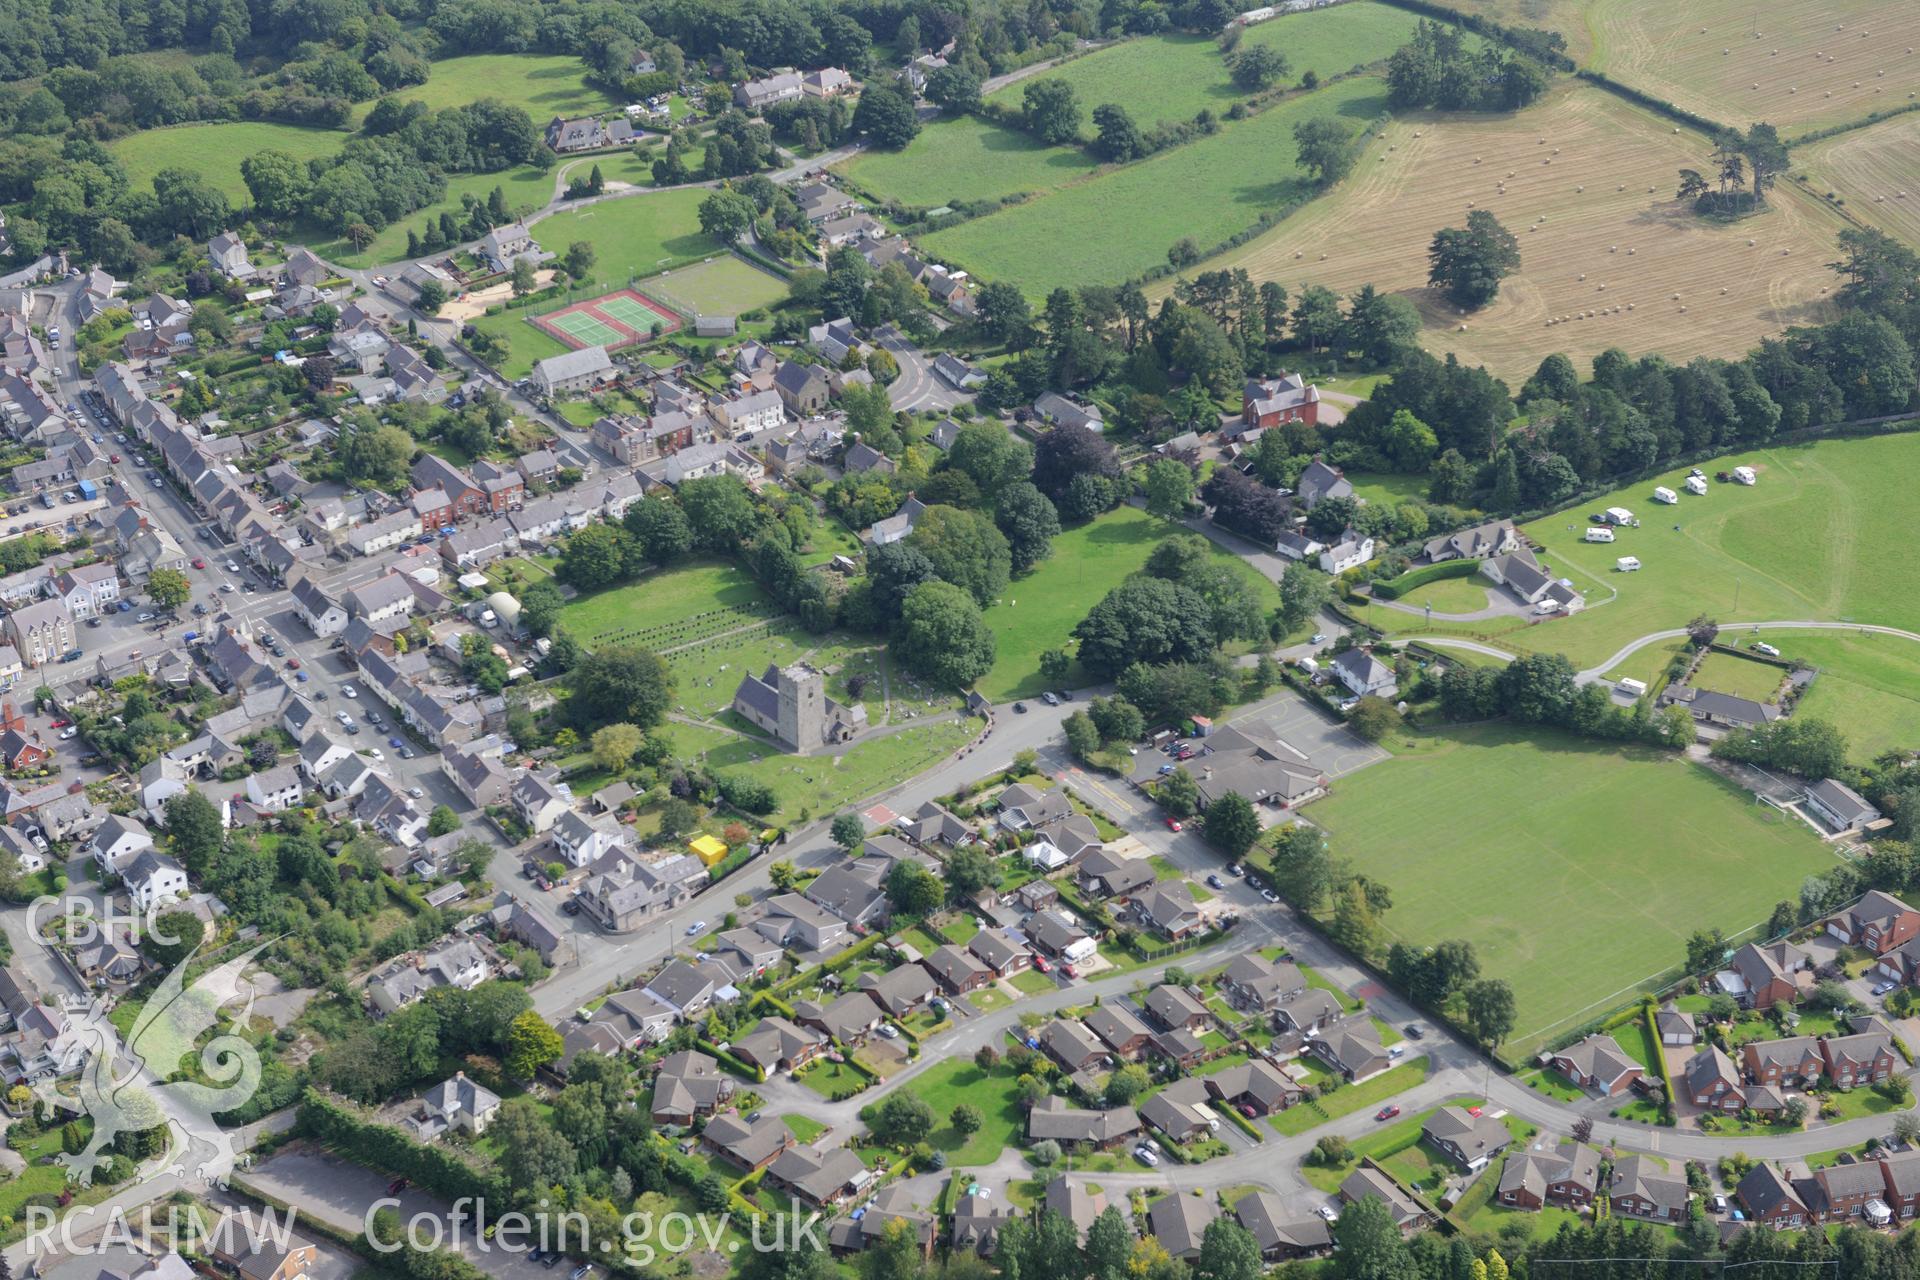 St Michael's church in the town of Caerwys, near Holywell. Oblique aerial photograph taken during the Royal Commission's programme of archaeological aerial reconnaissance by Toby Driver on 11th September 2015.